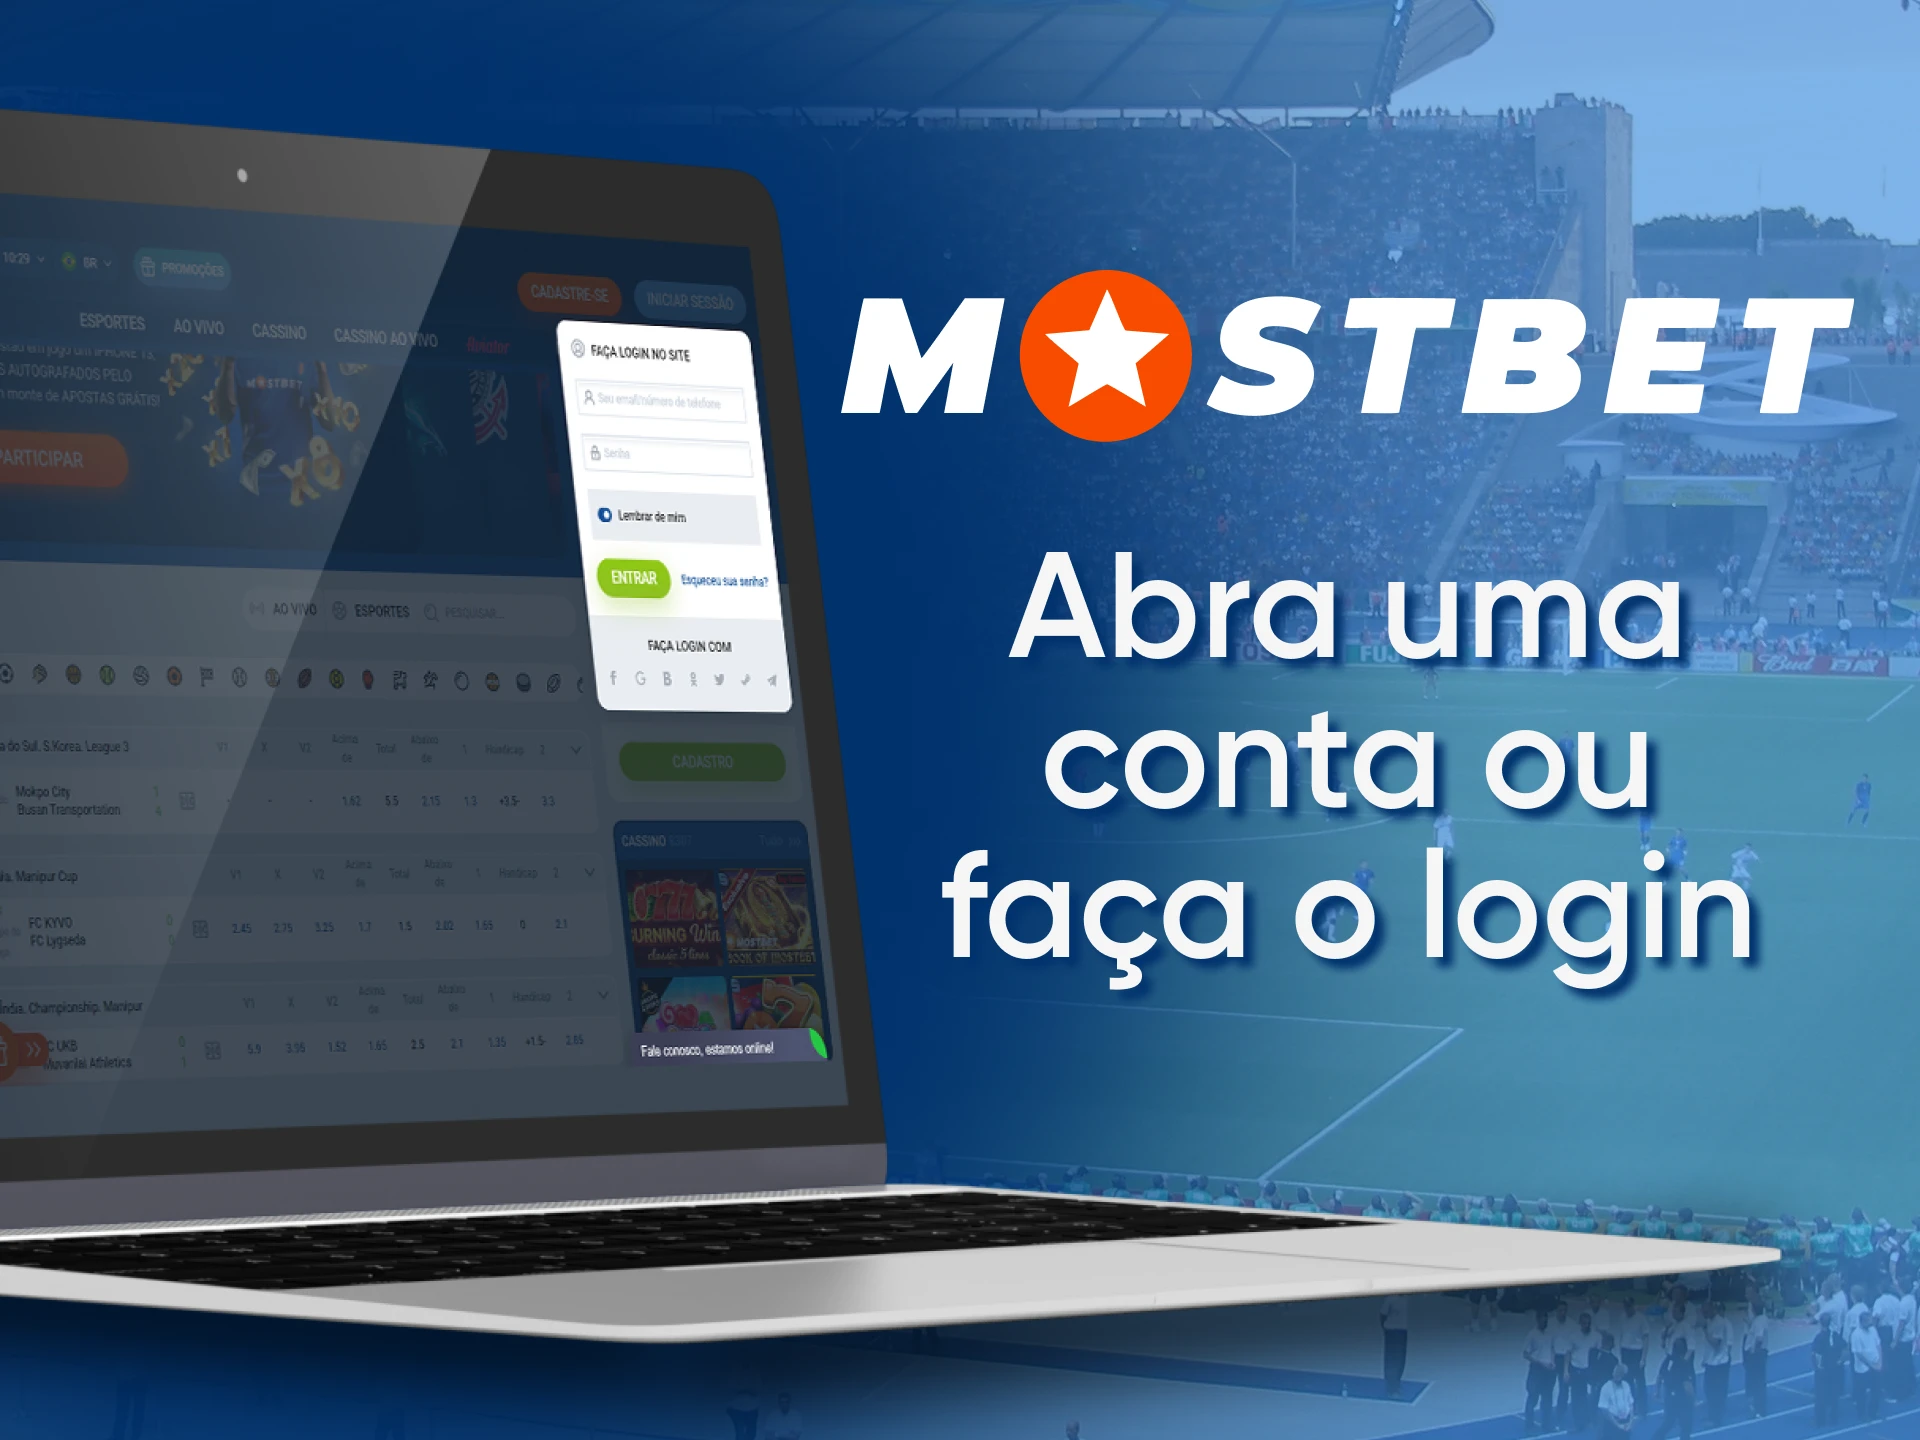 Access your Mostbet user area.